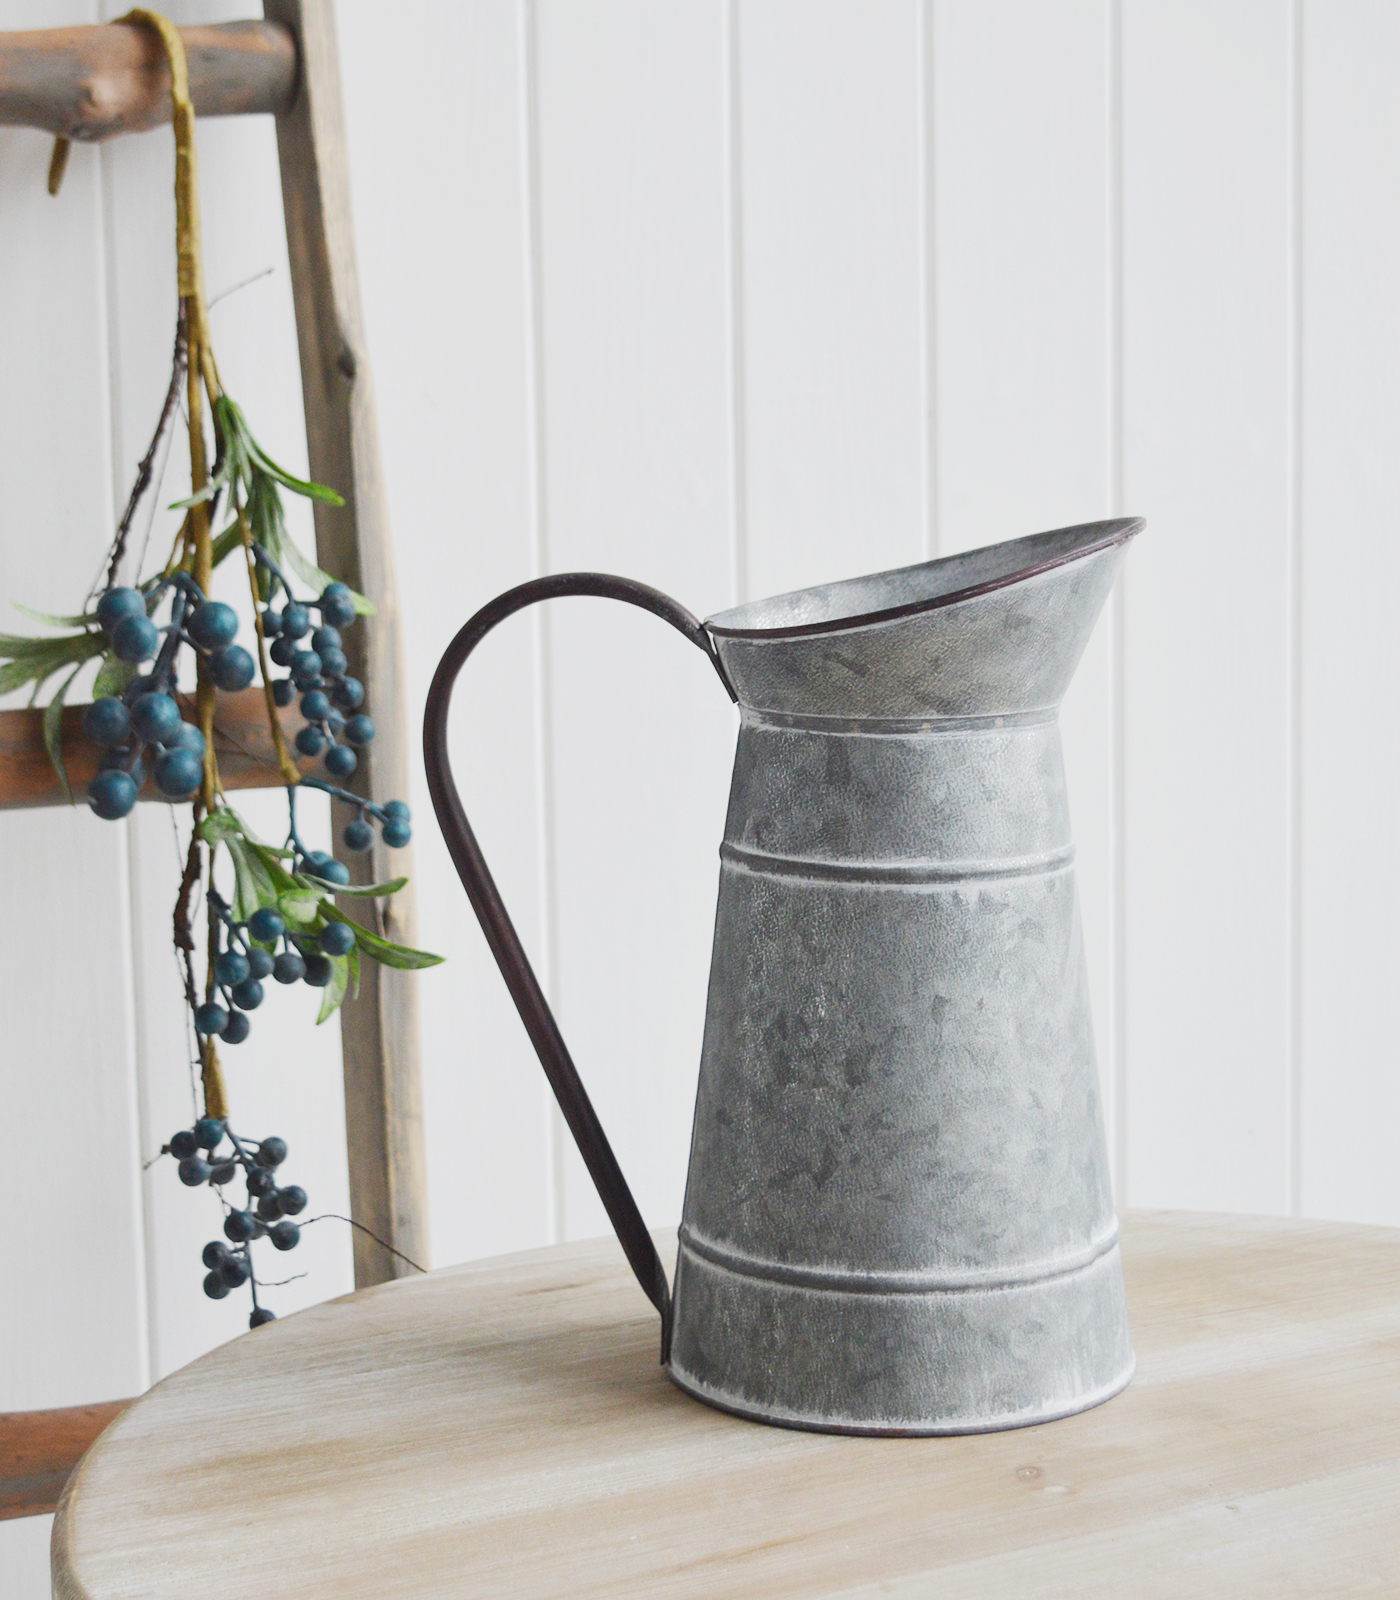 Metal Jug Pitcher Vase from The White Lighthouse coastal, New England and country furniture and home decor accessories UK